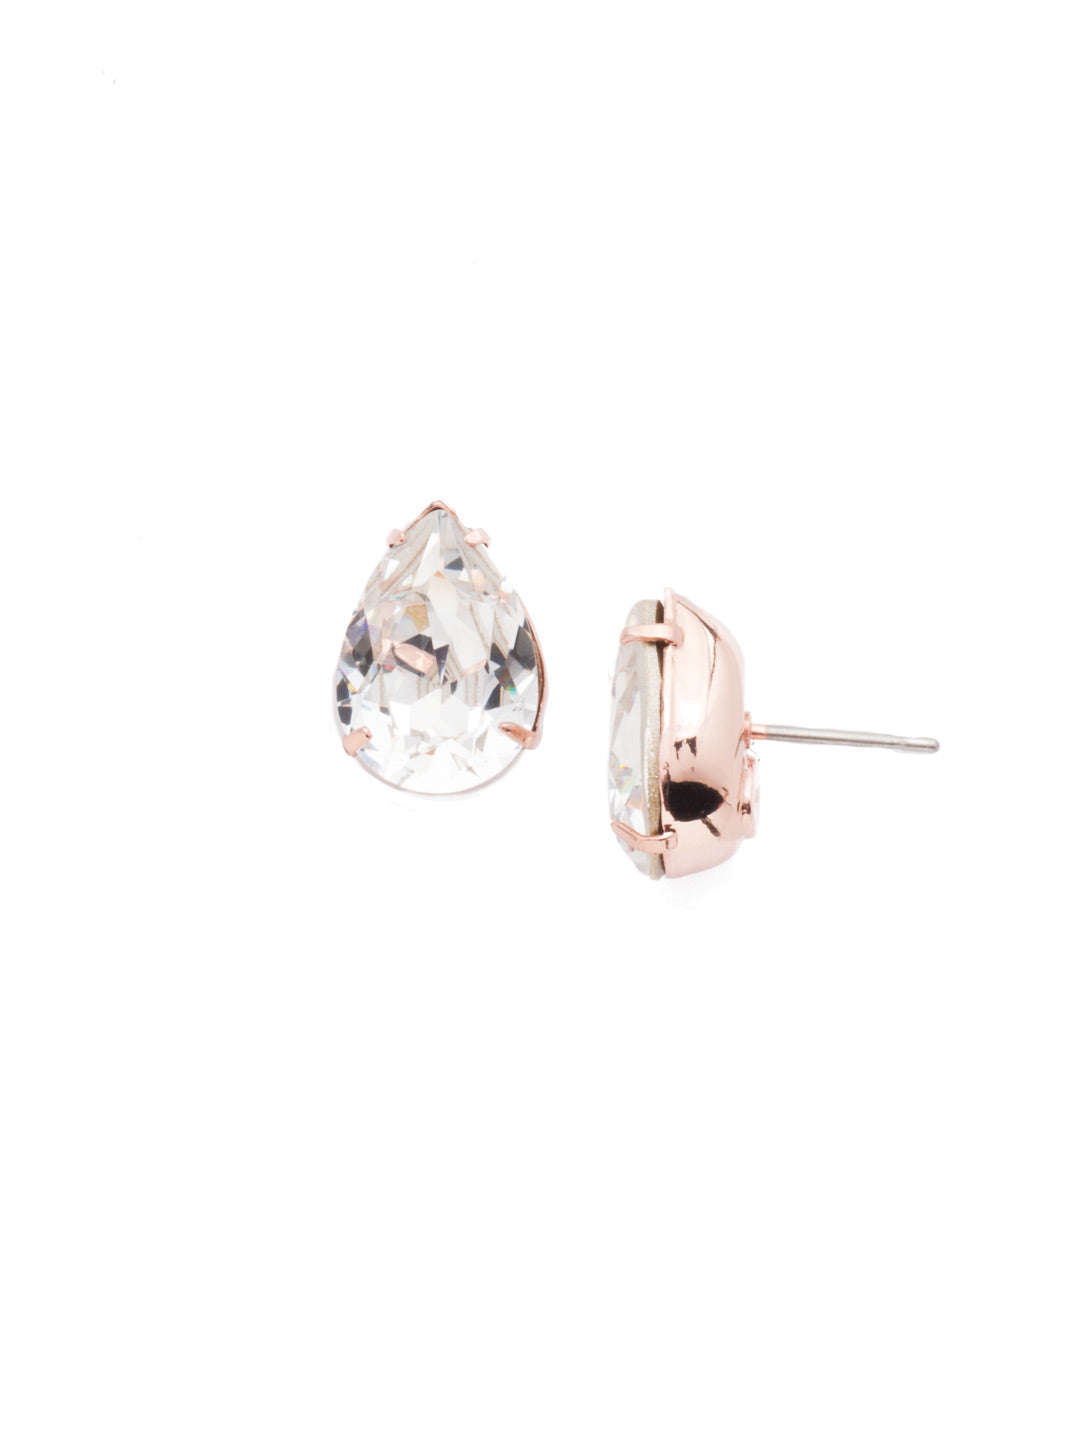 Ginnie Stud Earrings - ECR115RGCRY - <p>A beautiful basic stud. These classic single teardrop post earrings are perfect for any occasion, especially the everyday look. A timeless treasure that will sparkle season after season. From Sorrelli's Crystal collection in our Rose Gold-tone finish.</p>